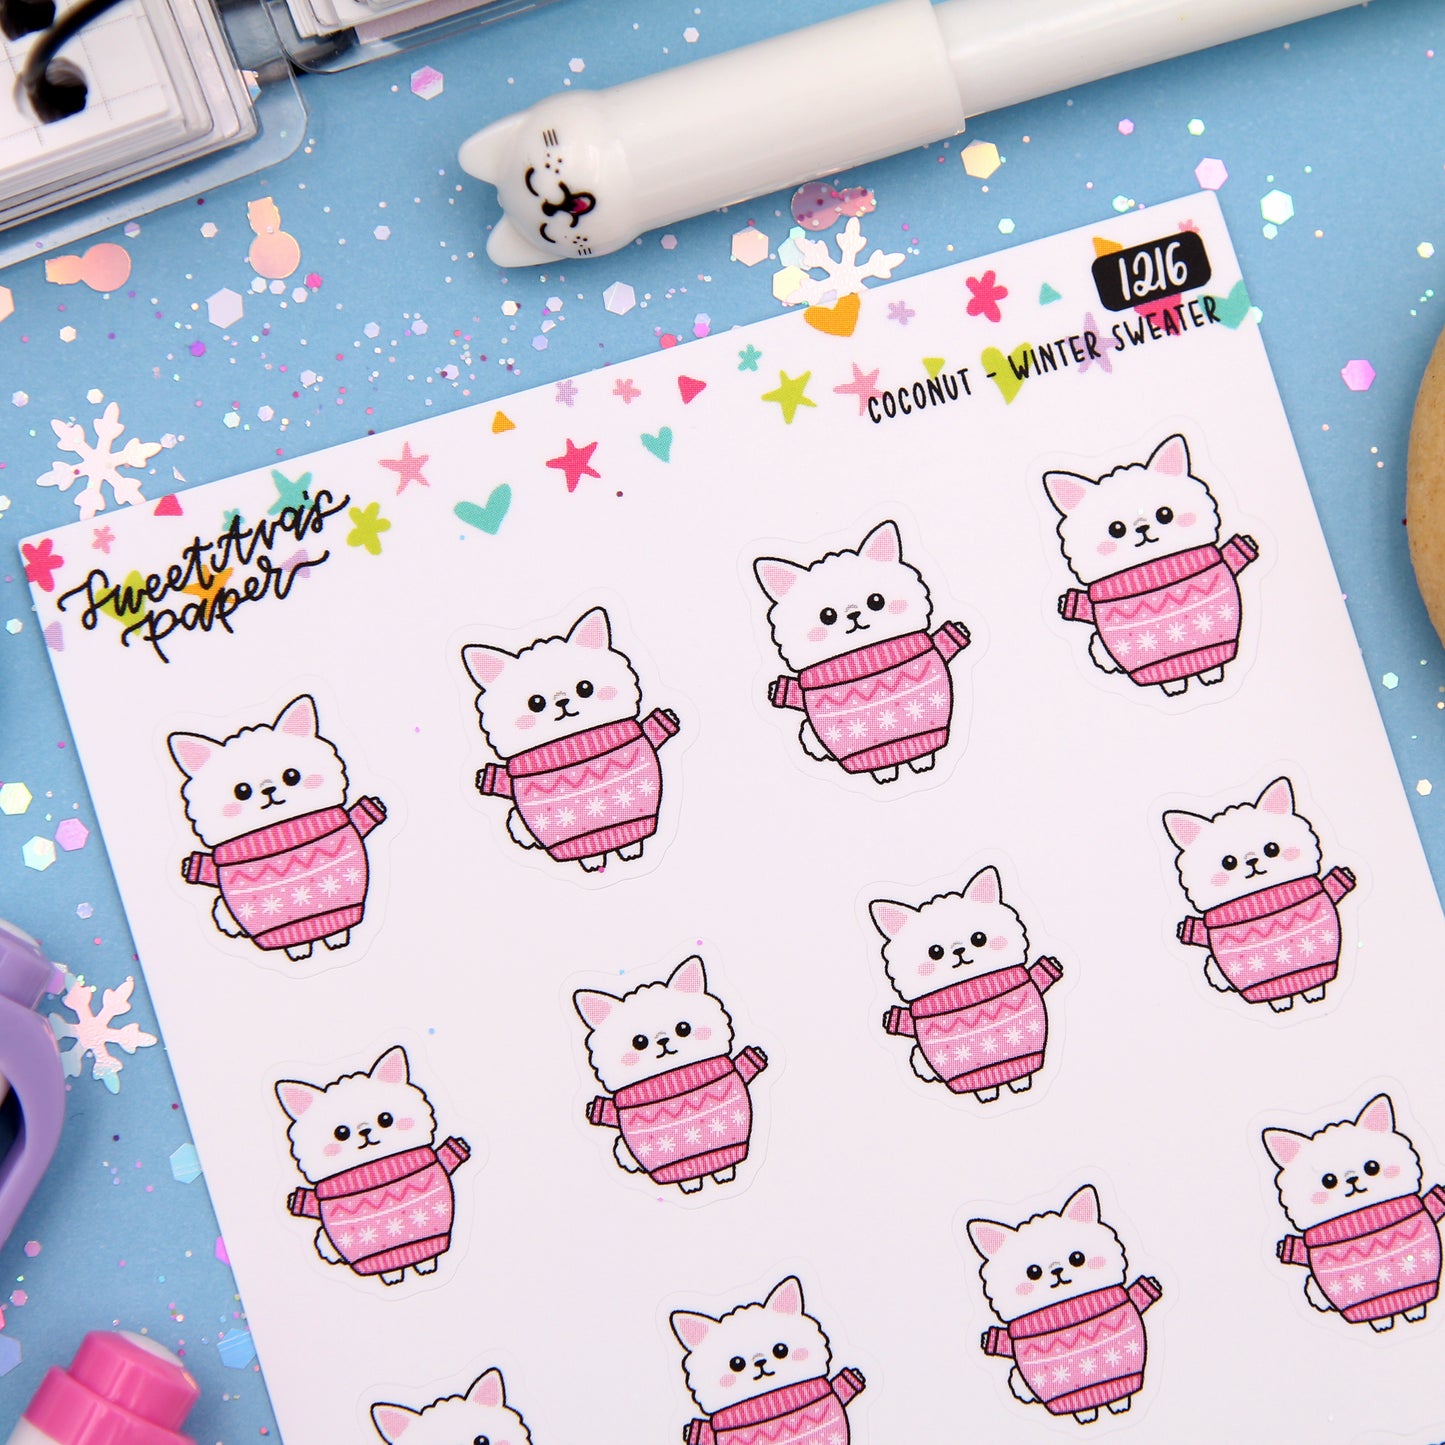 Sweater Weather Planner Stickers - Coconut the Puppy [1216]